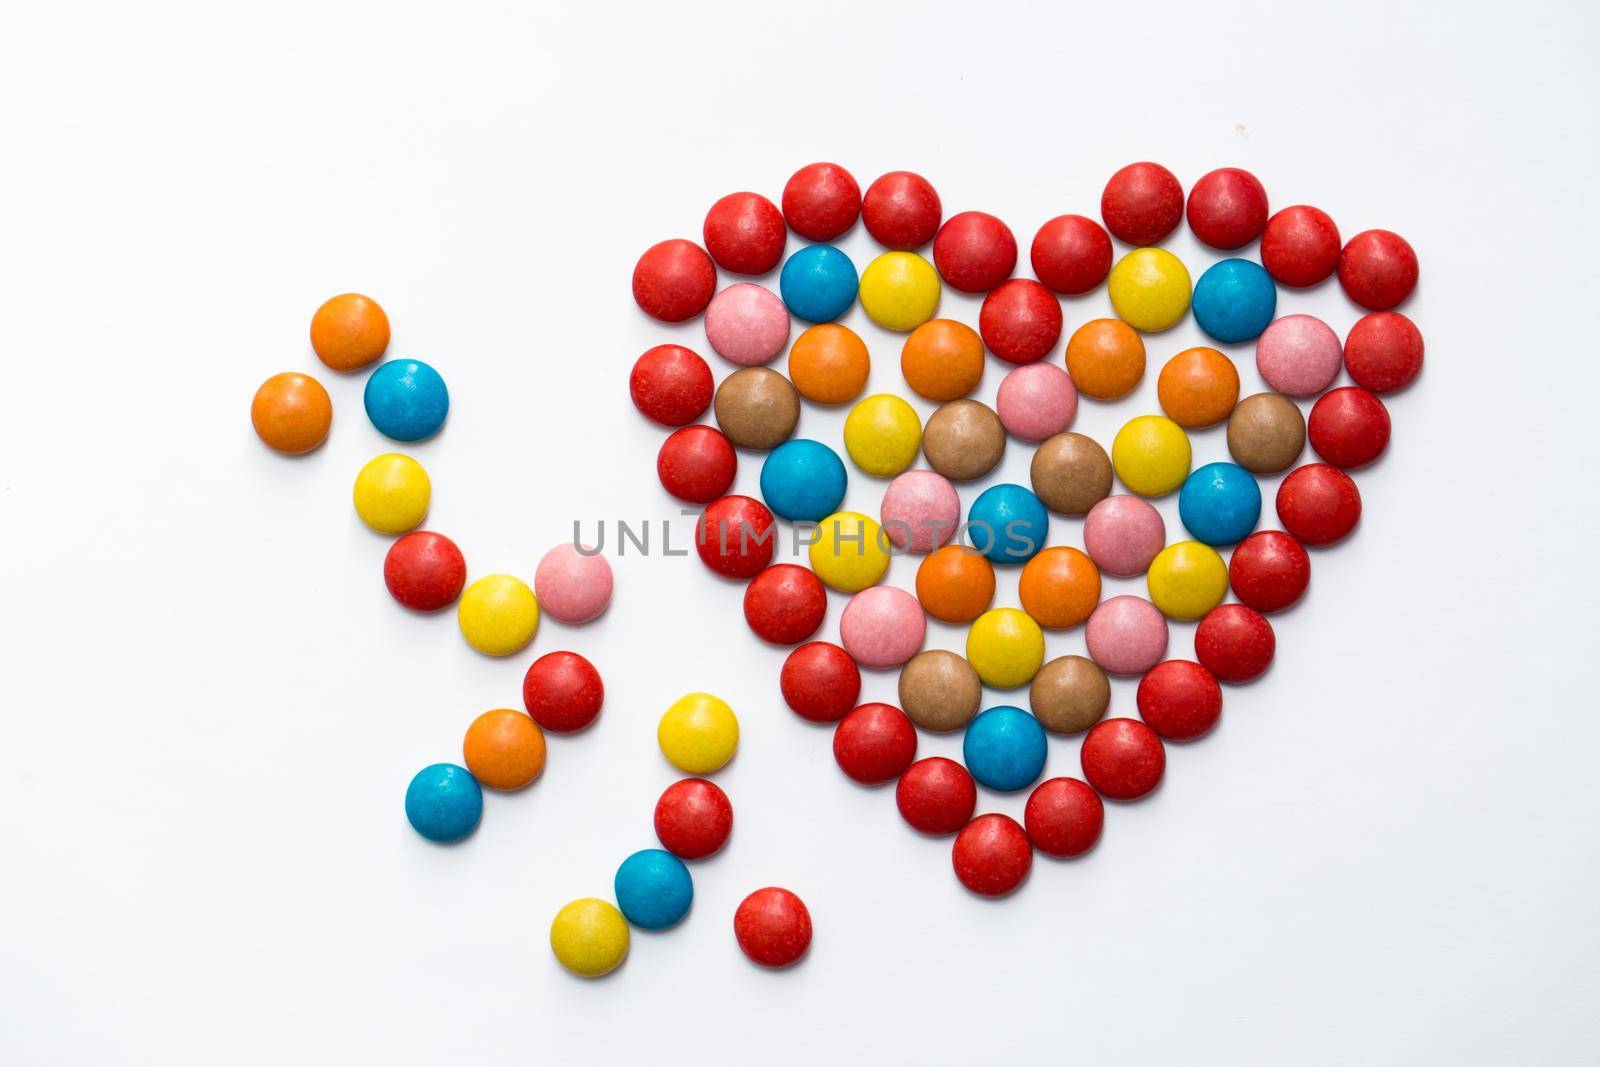 Colorful button chocolate candies in the love shape on white background